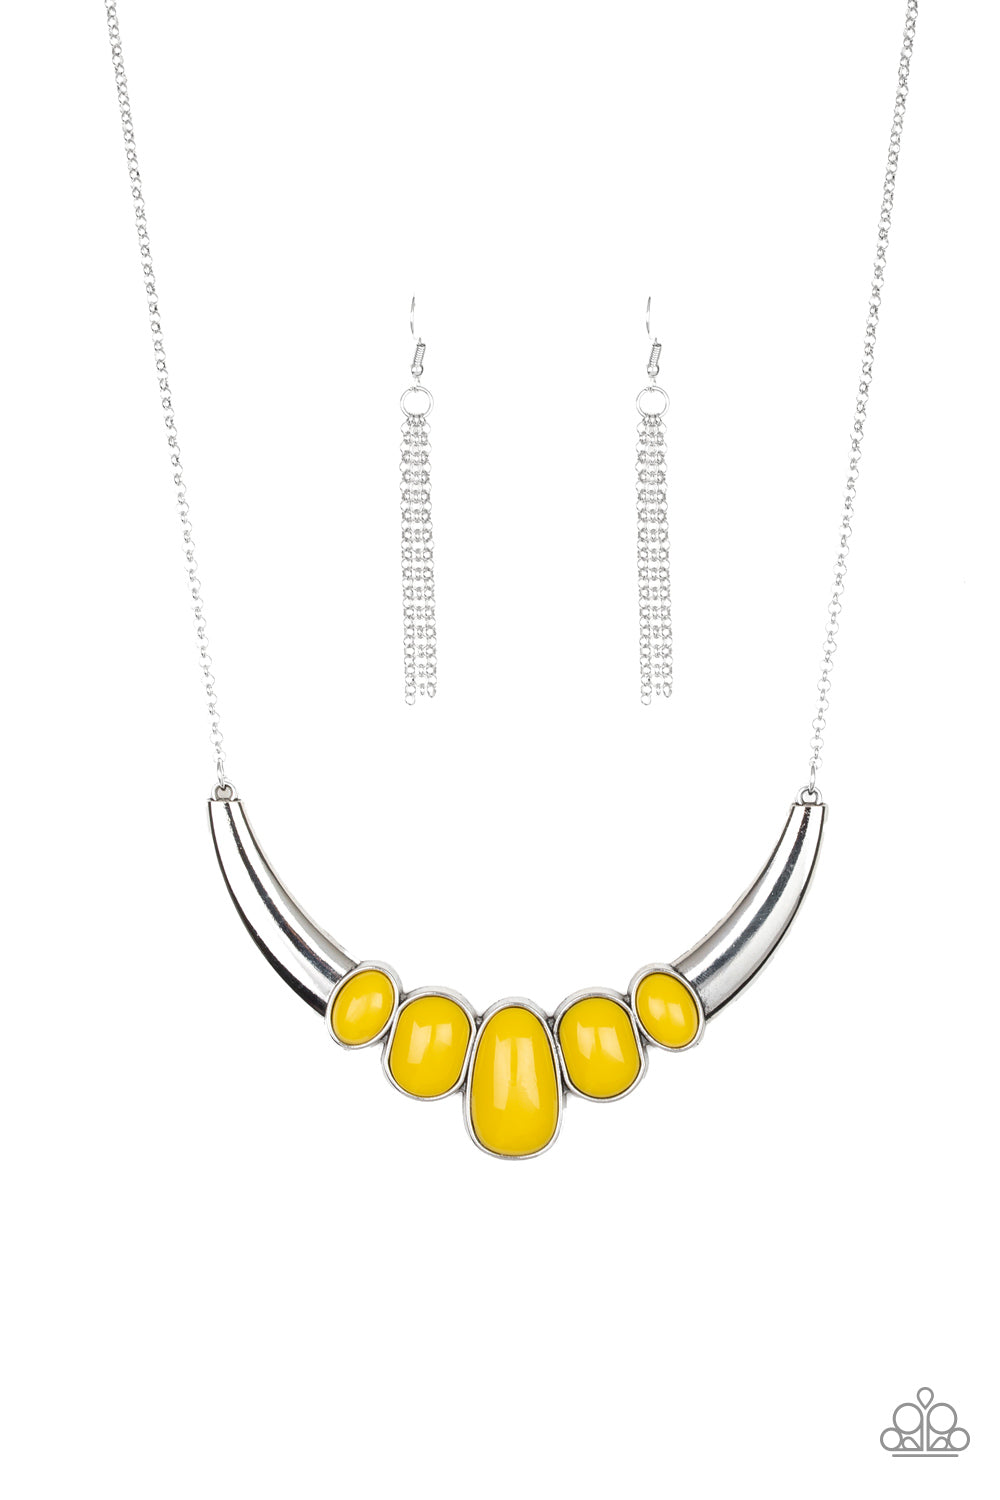 A BULL HOUSE - YELLOW NECKLACE